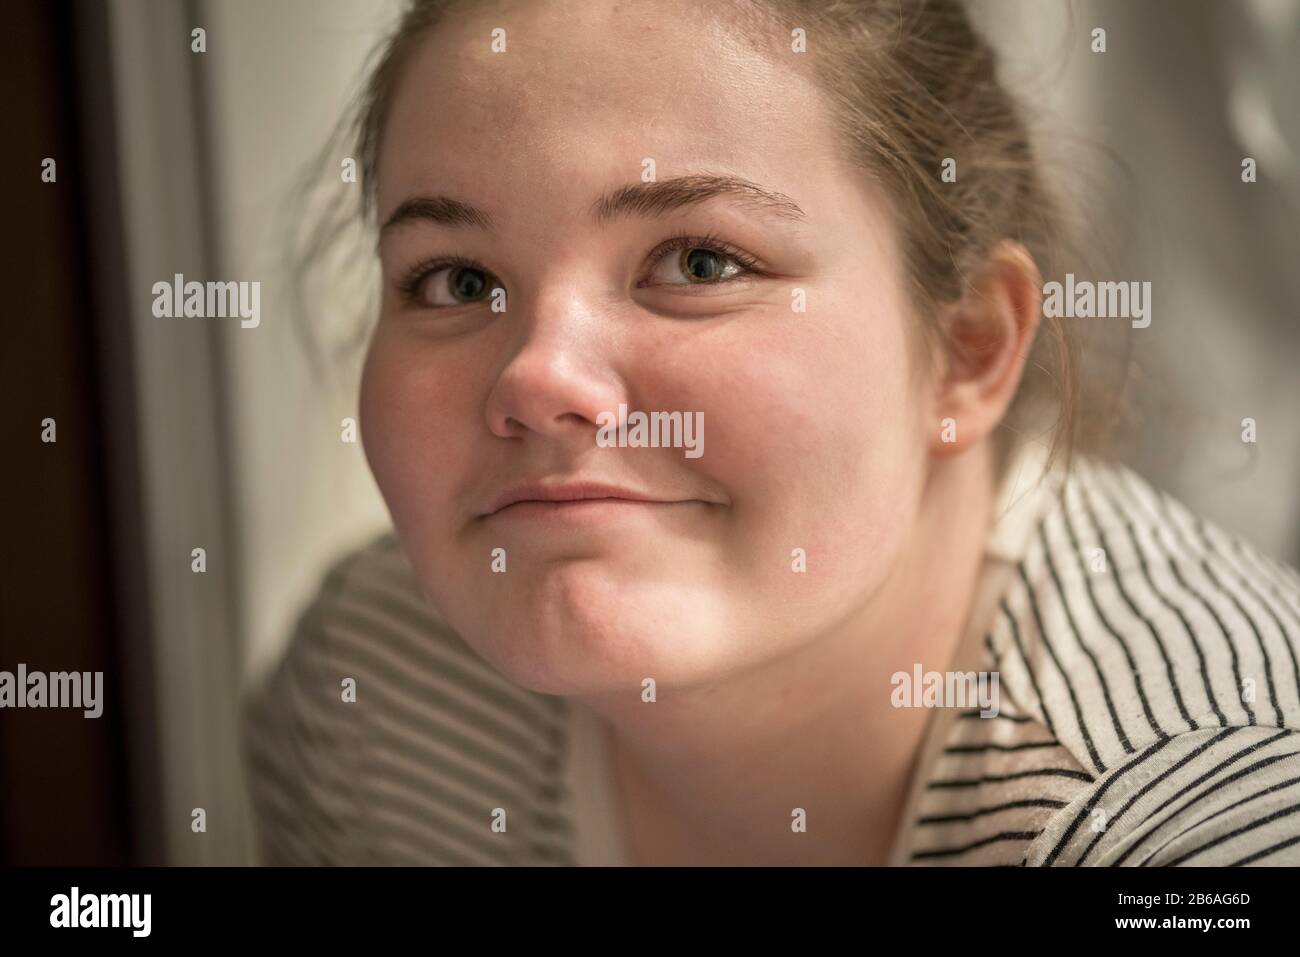 Face only, close up portrait of a 14 year old teenage girl. Stock Photo